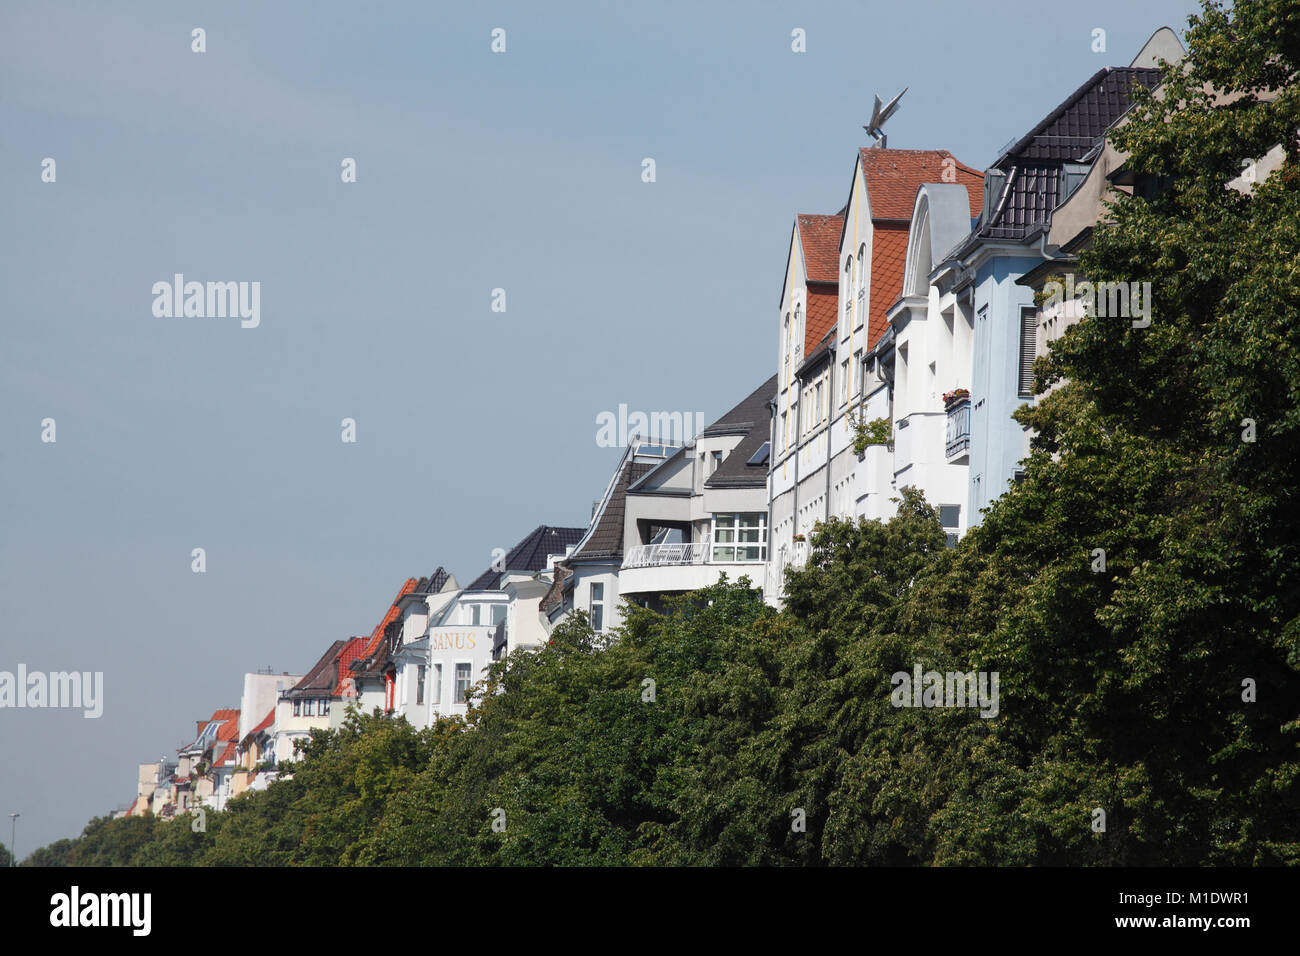 Residential buildings, old buildings and new buildings on Kaiserdamm Street, house facades in Charlottenburg, Berlin, Germany, Europe  I  Wohngebäude, Stock Photo